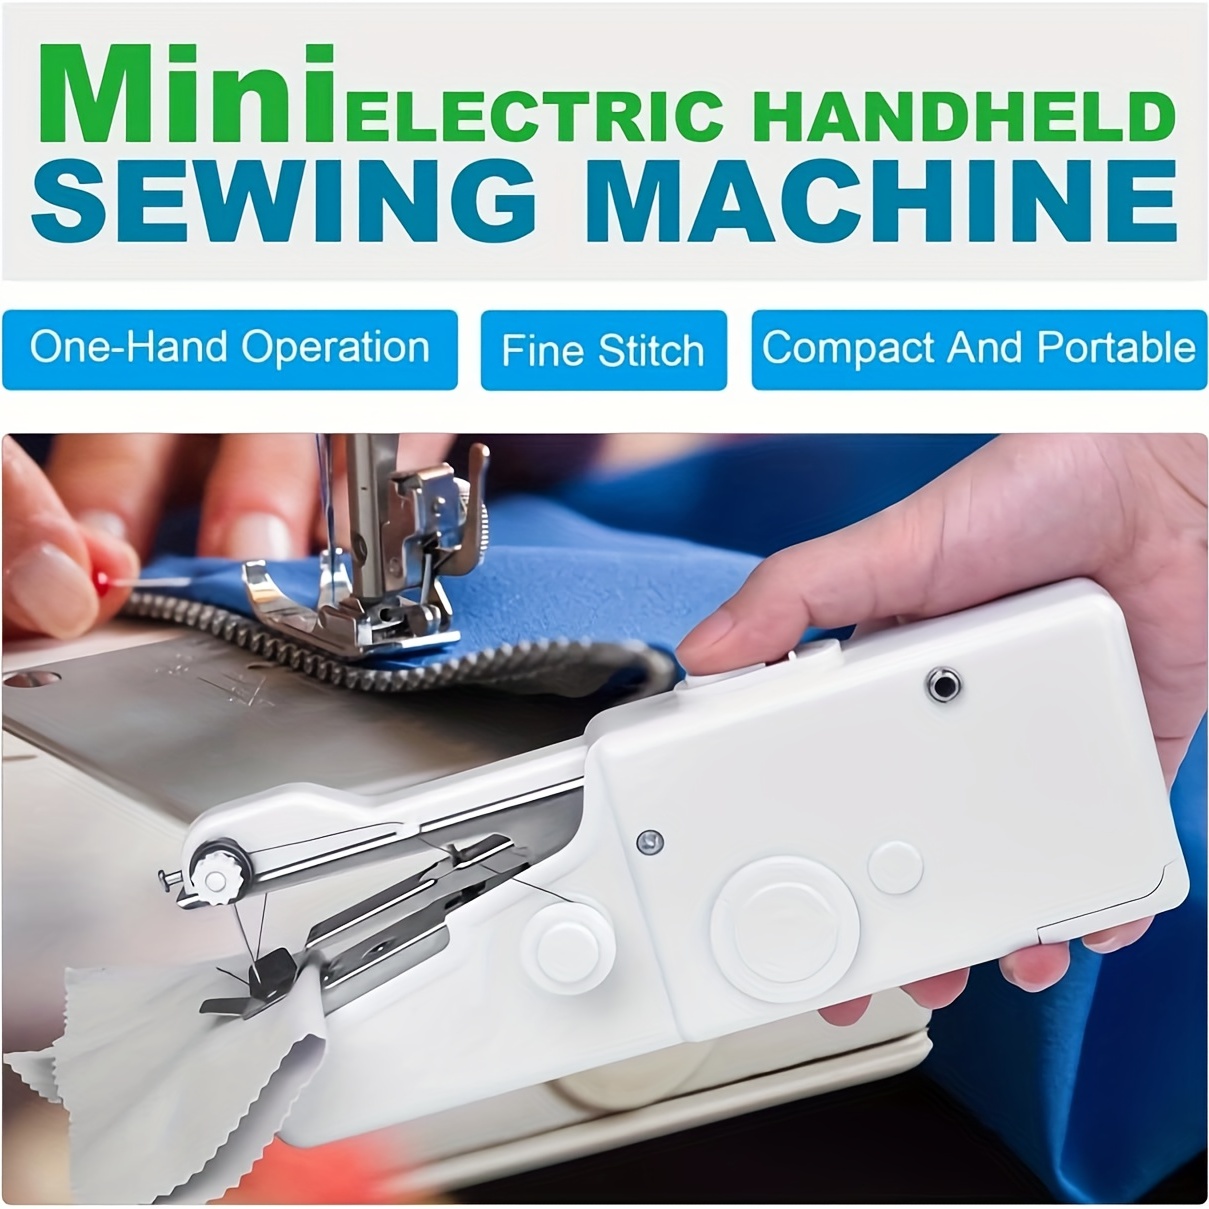  Handheld Sewing Machine, Hand Held Sewing Device Tool Mini Single  Stitch Portable Cordless Sewing Machine, Essentials for Home Travel Use  Repairing and Handicrafts (White)